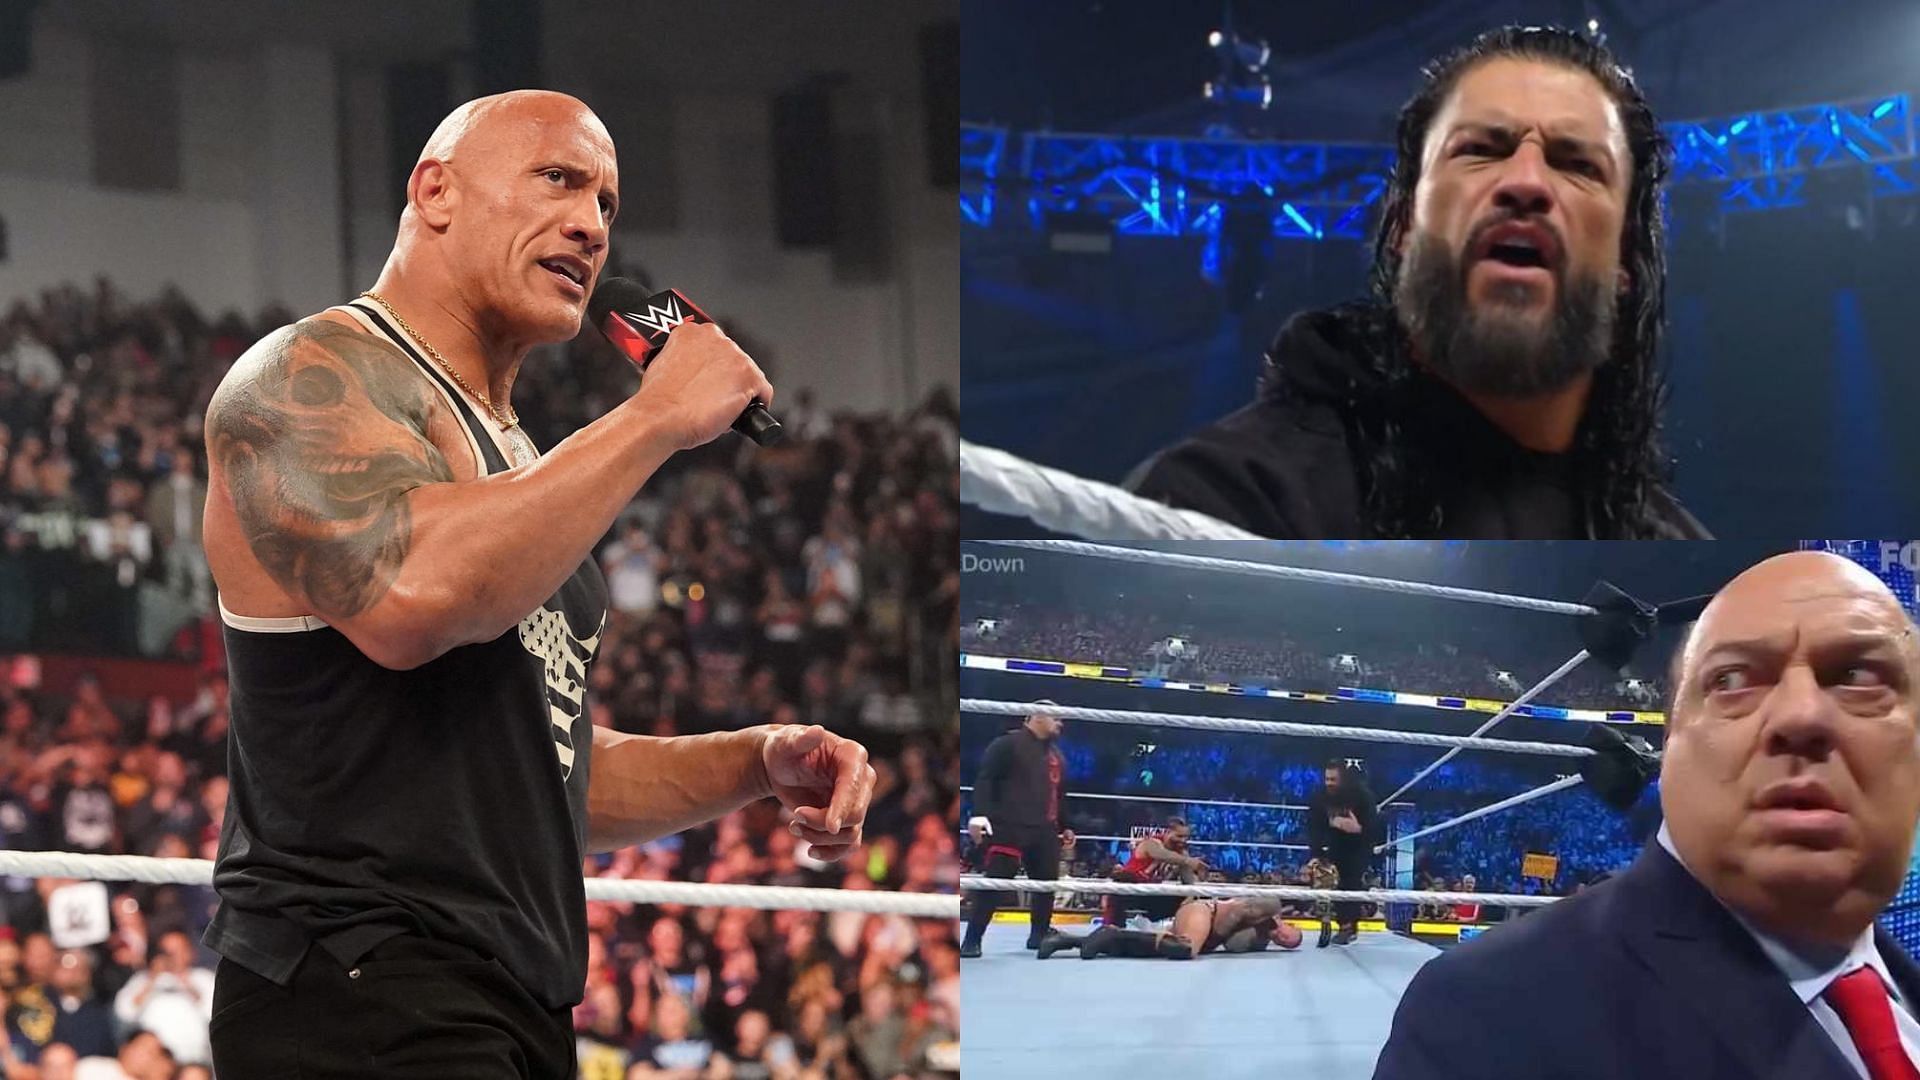 The Rock teased a match against Roman Reigns (Photo Credits: WWE.com/SmackDown on FOX)